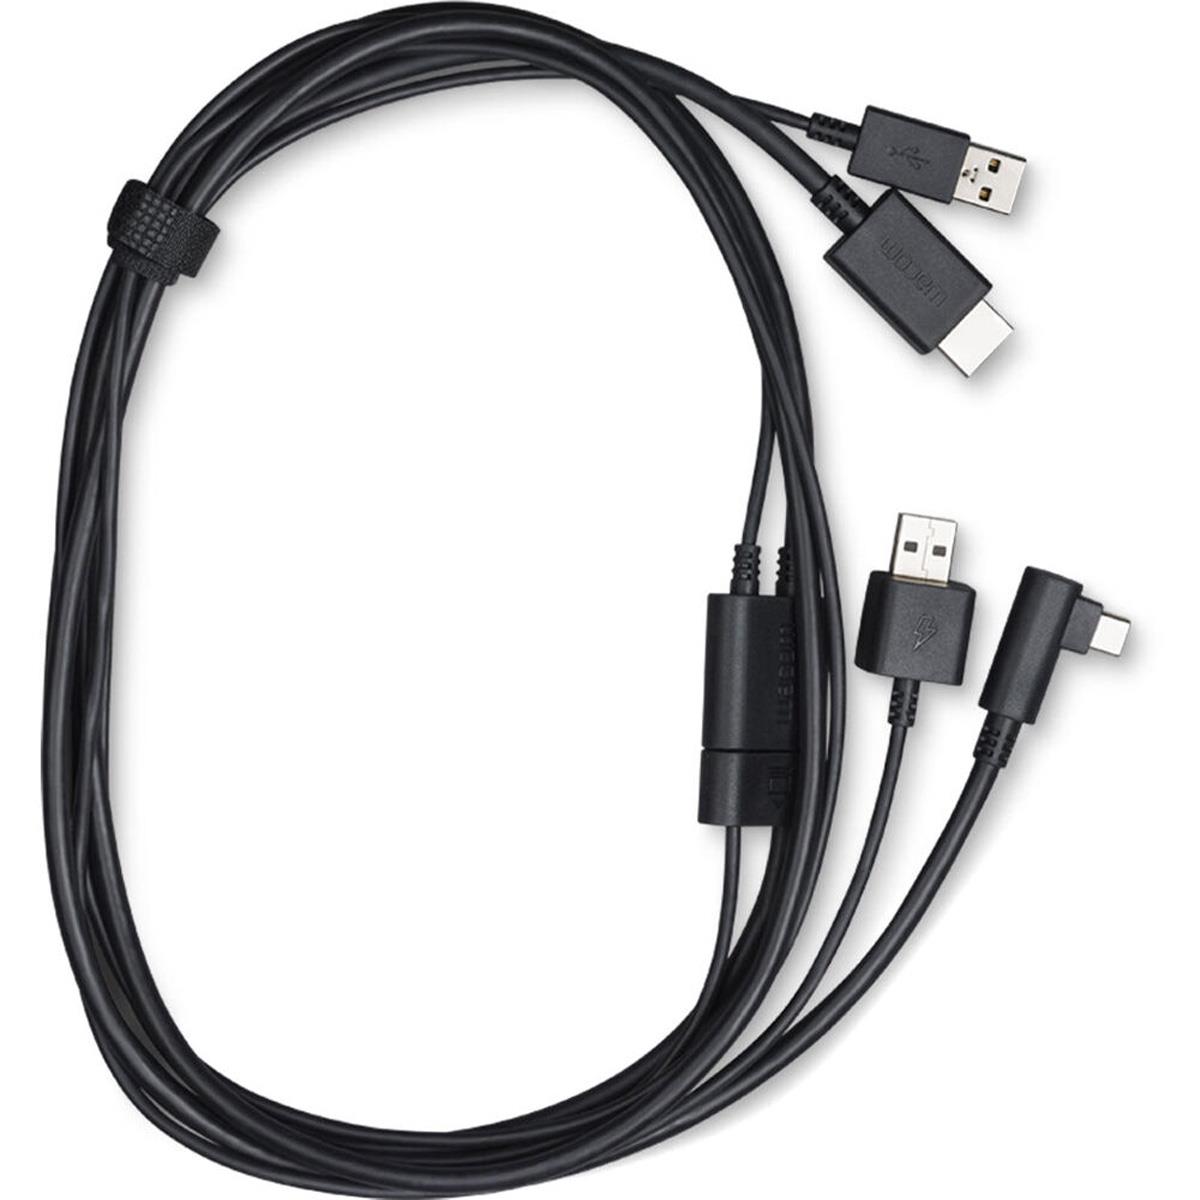 Image of Wacom X-Shape Cable for One Creative Pen Display